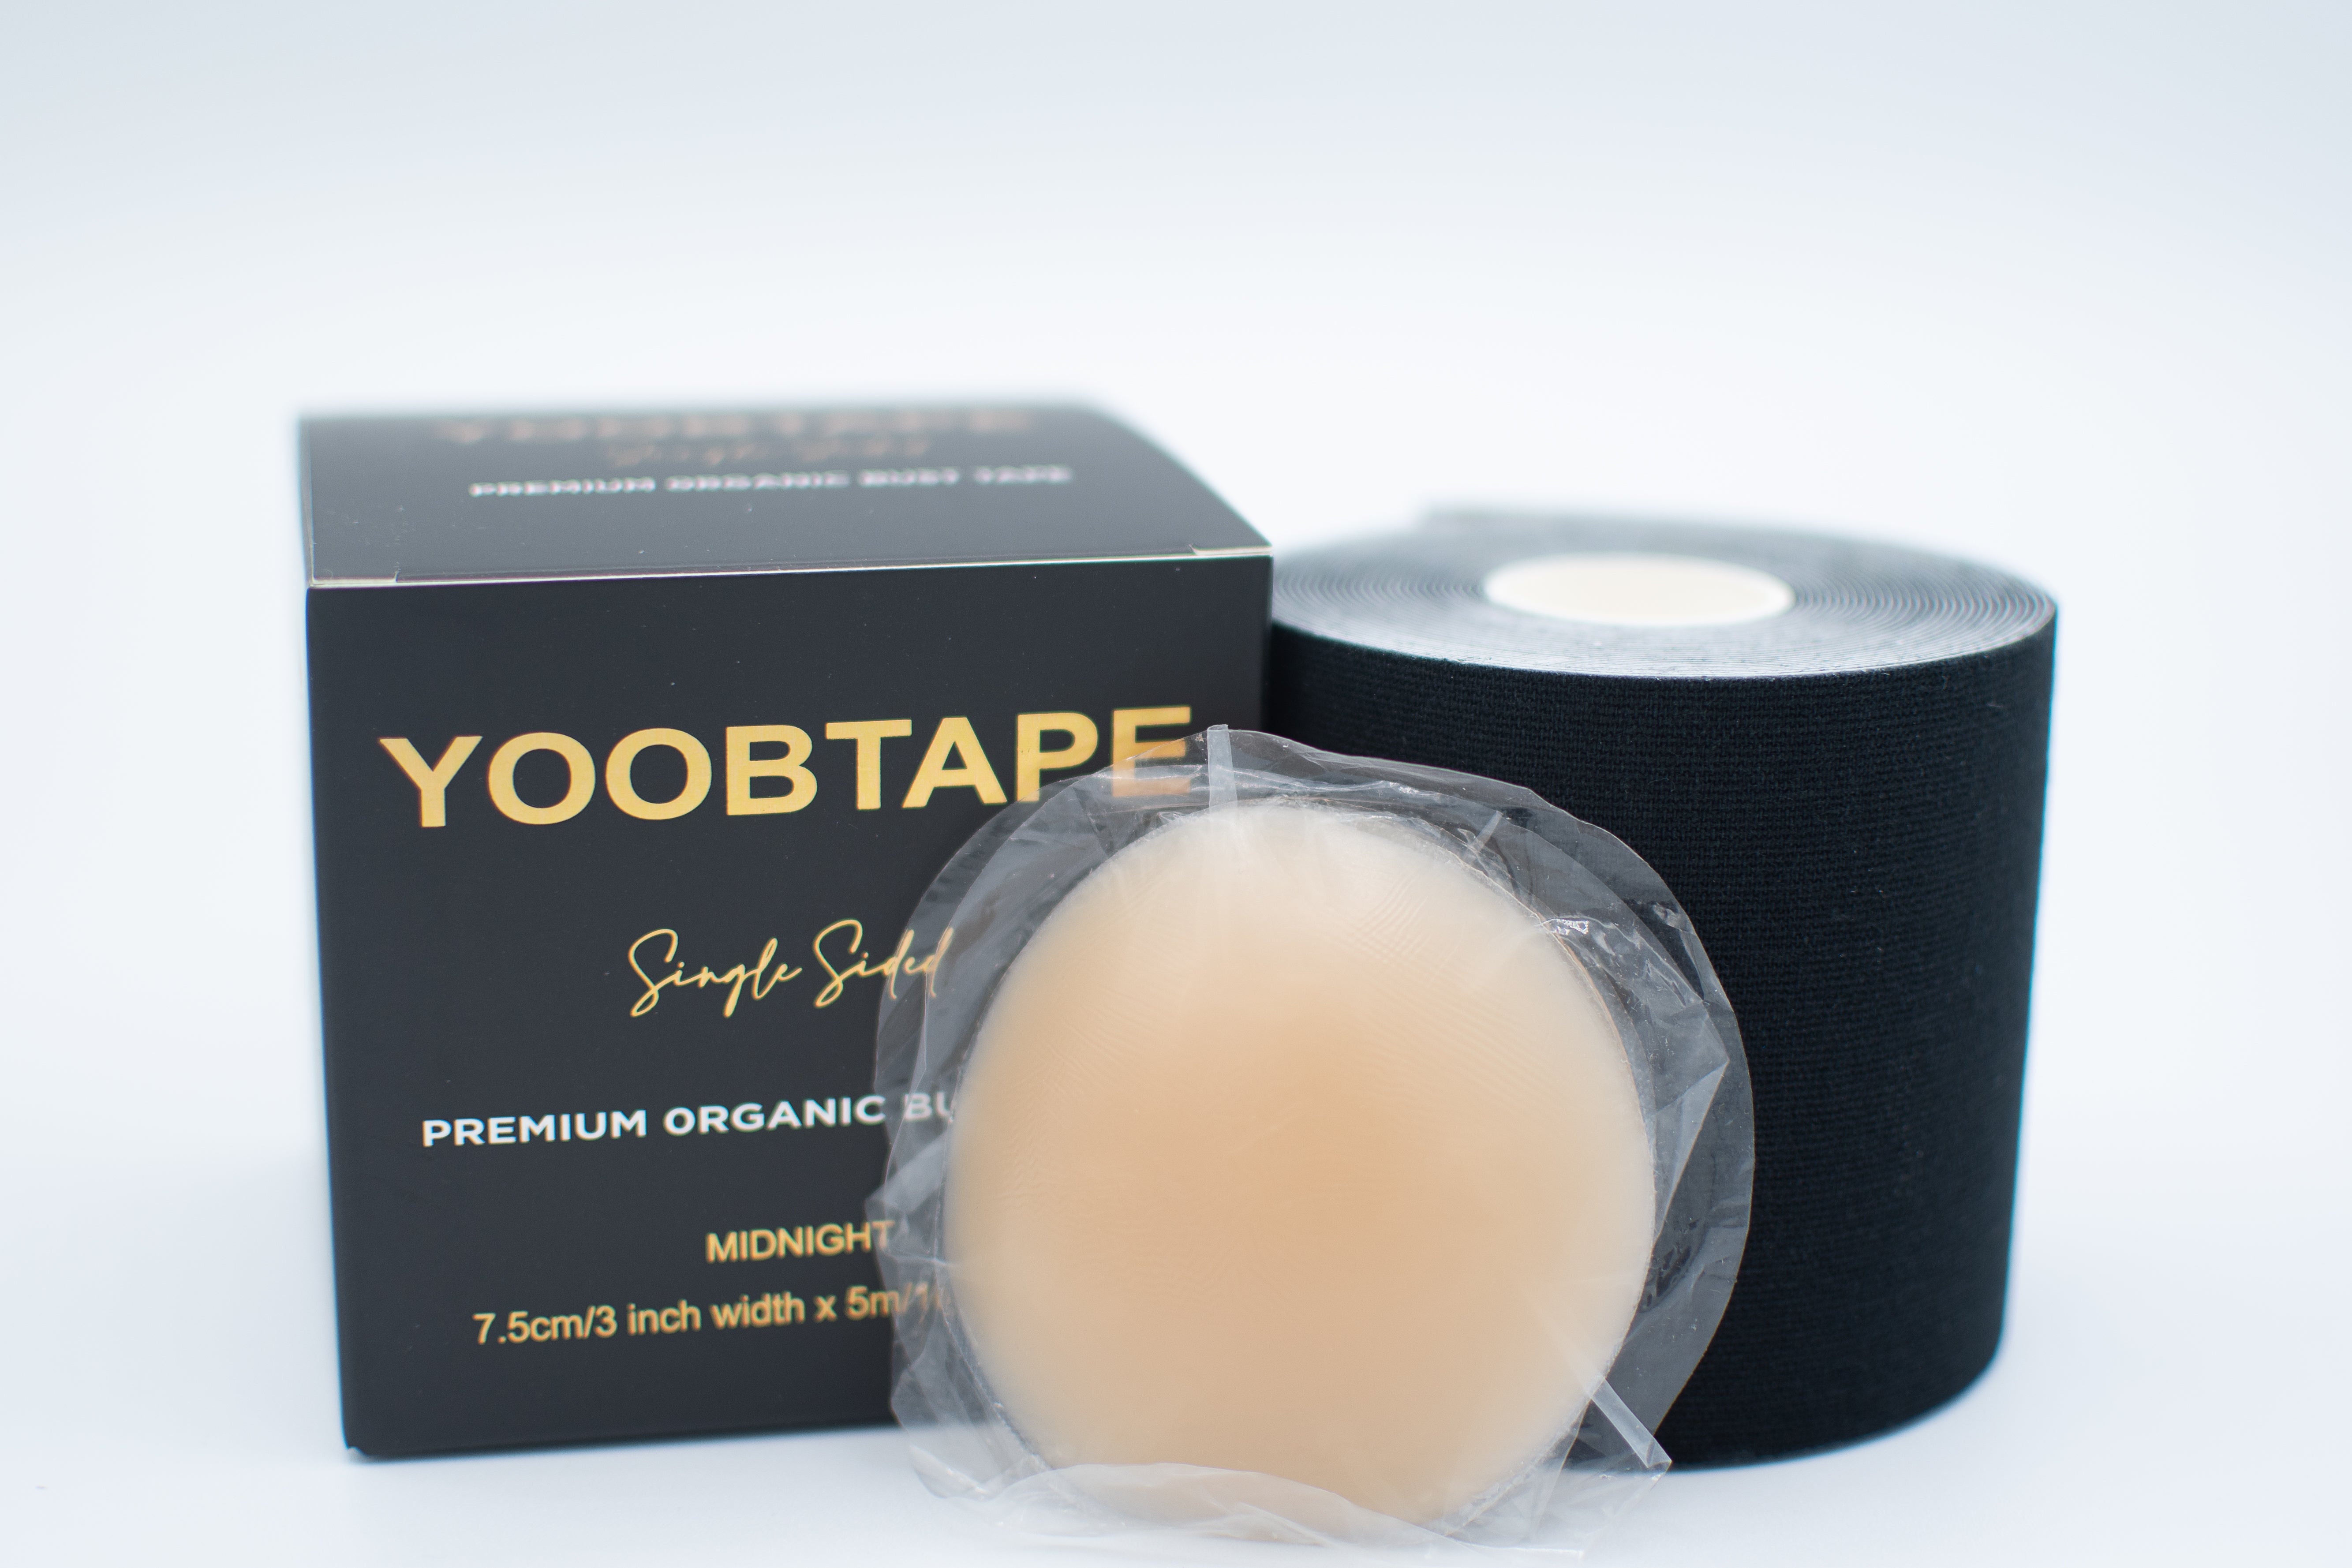 Boob Tape Premium Double Sided Bust Tape - Midnight